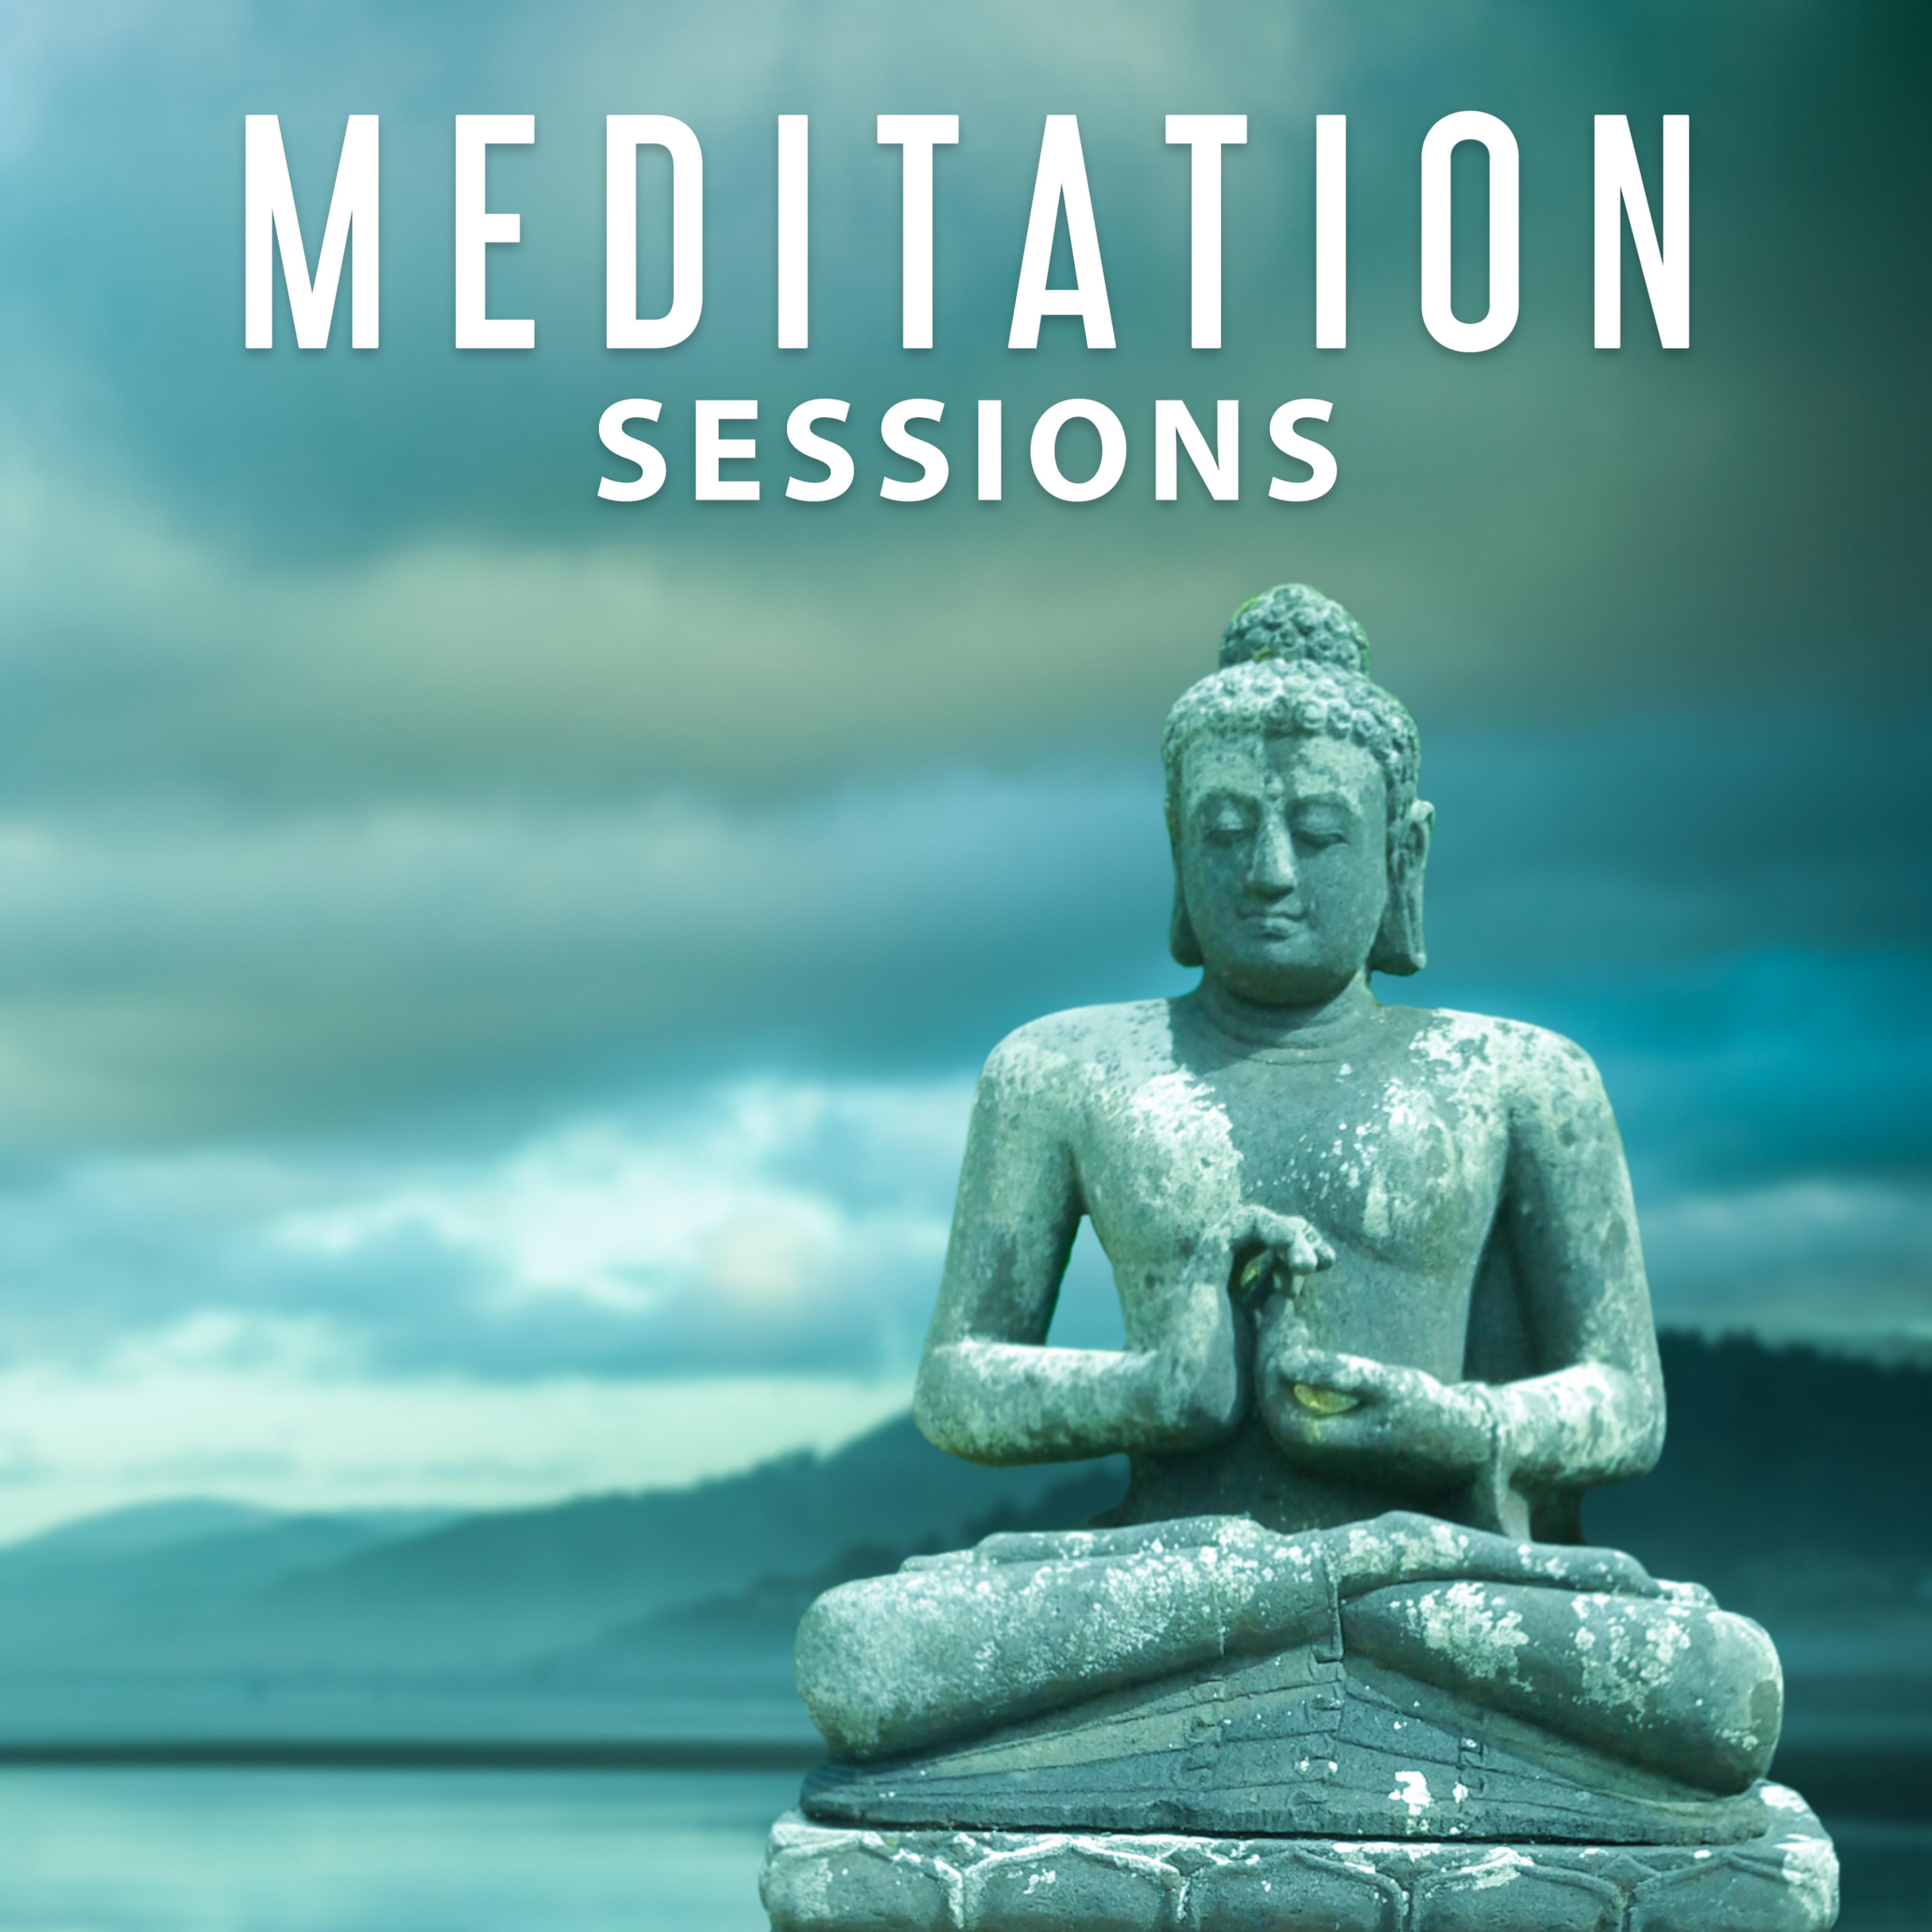 Meditation Sessions – Mystical Ambient Music, New Age Spirituality and Meditation, Deep Breathing, Healing Chakra